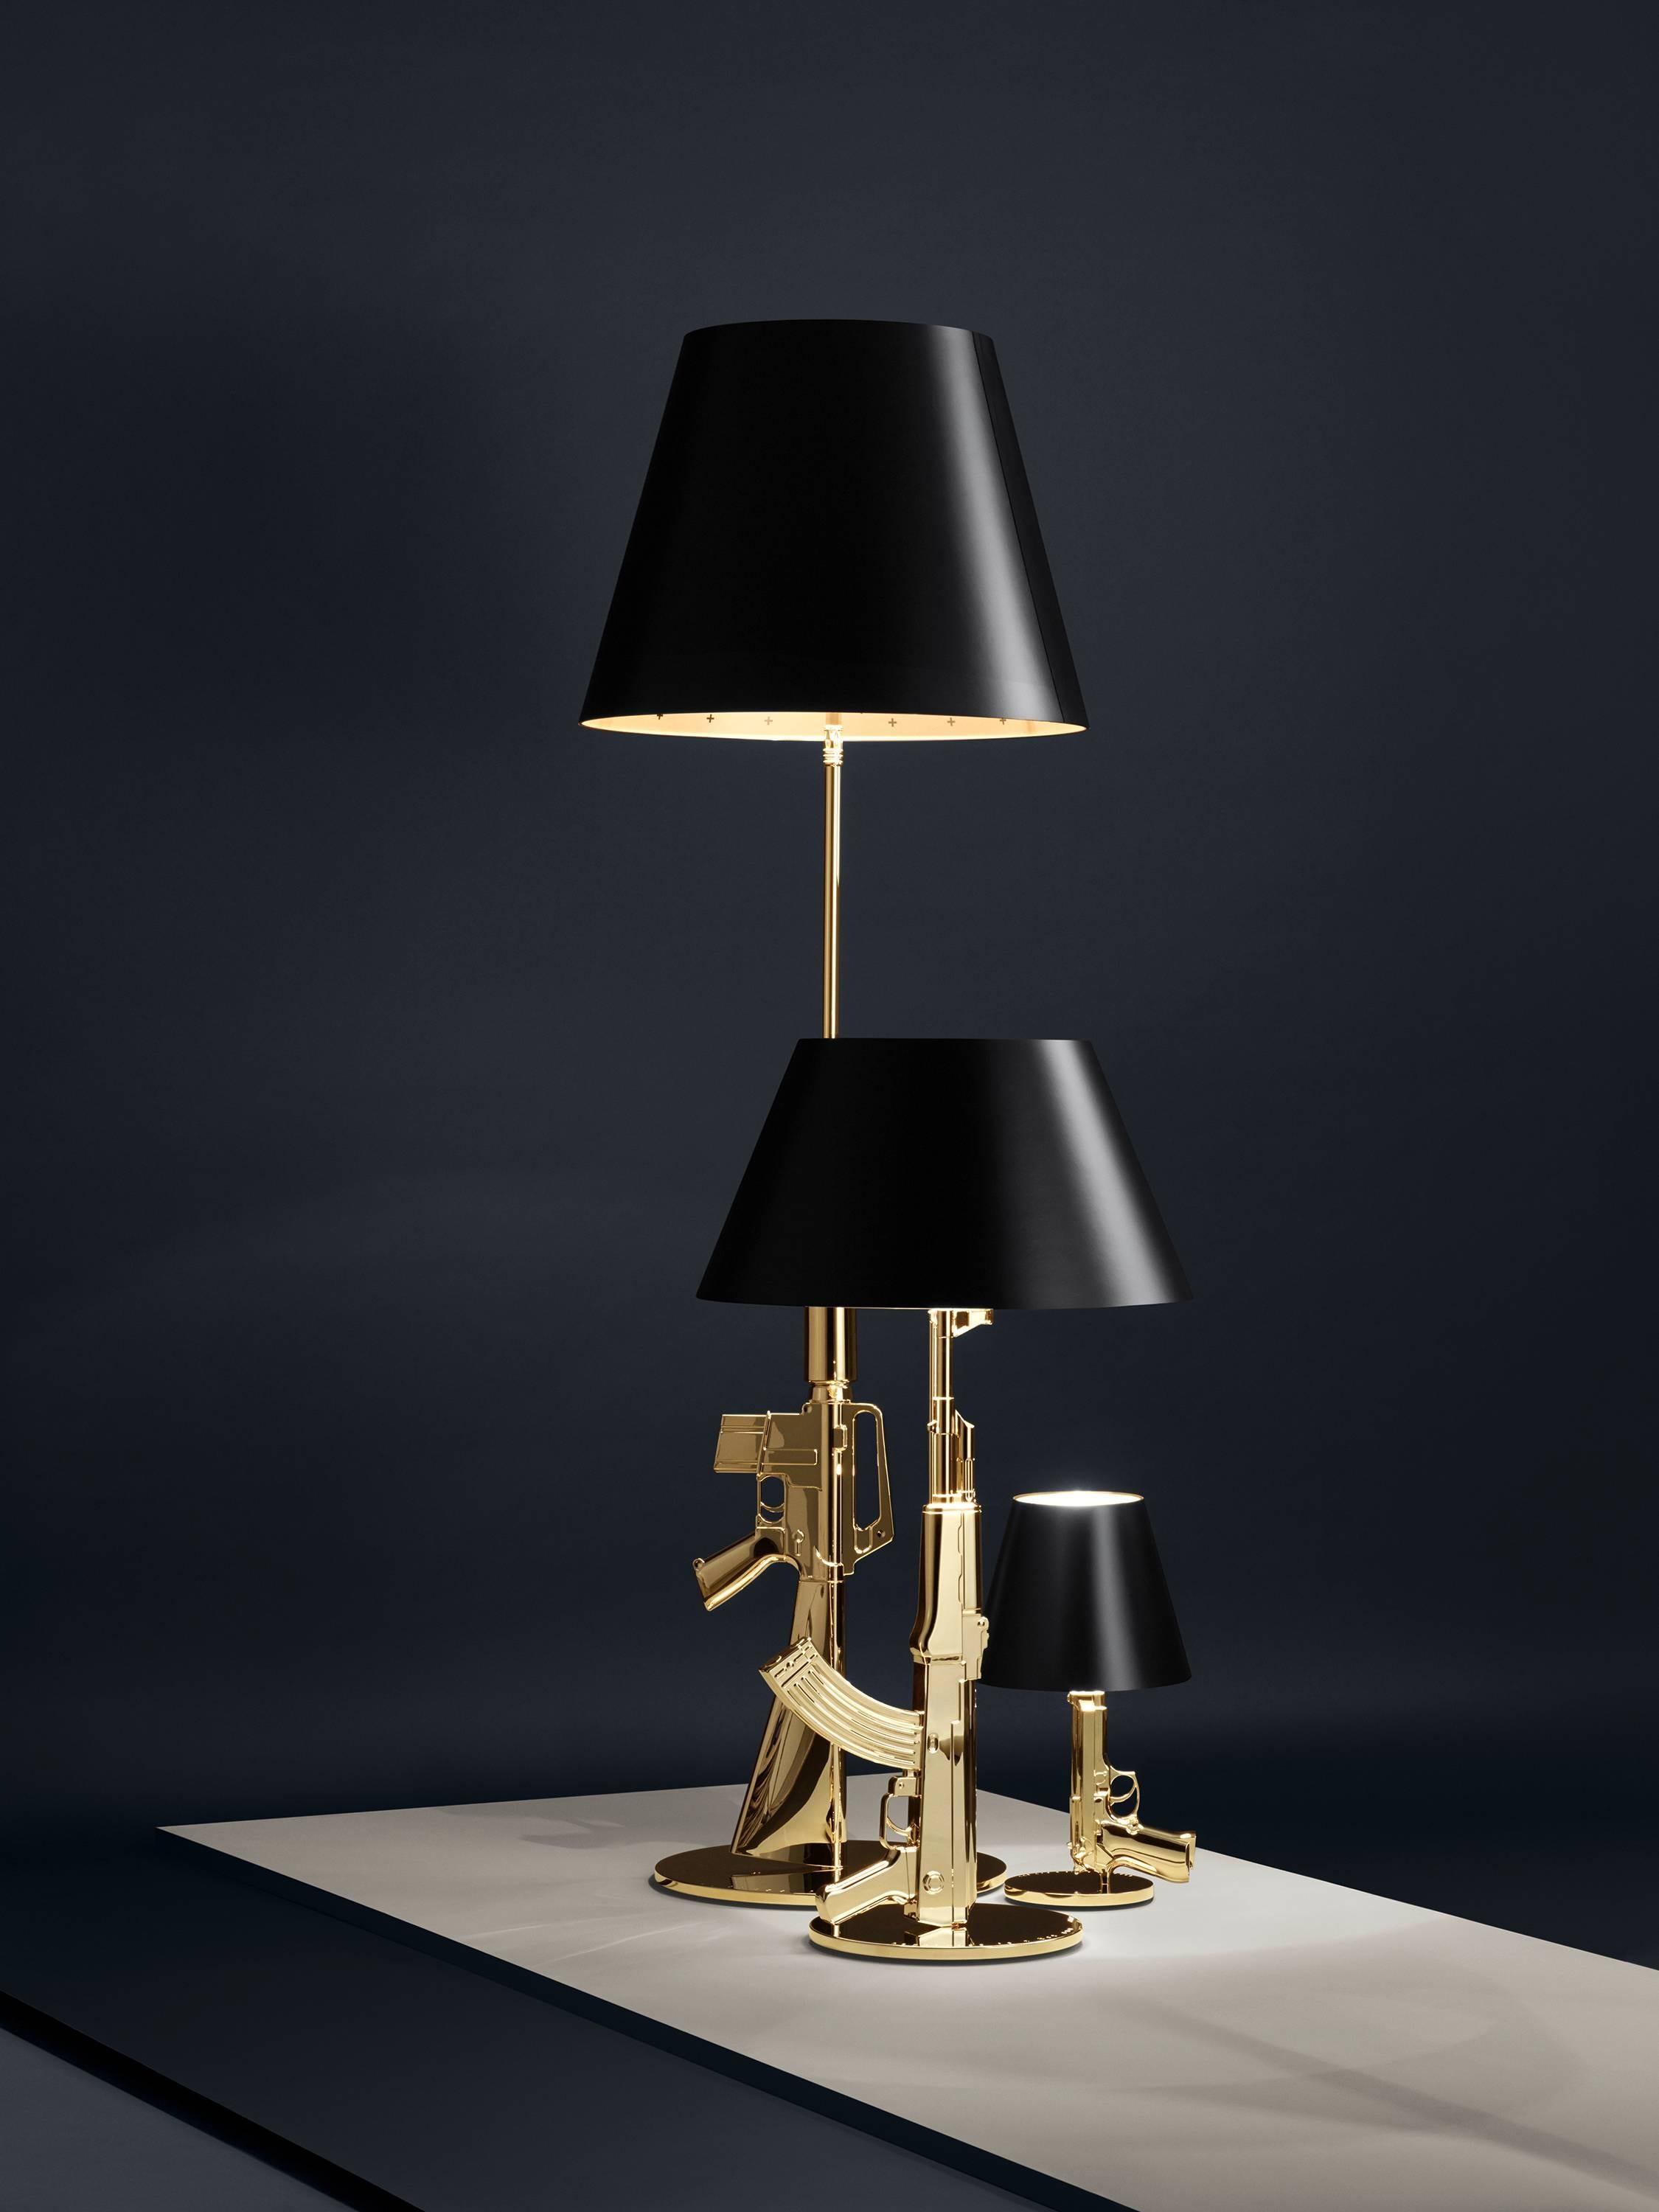 This sleek and edgy table lamp is part of the artist’s Guns Collection, making a statement while doing good. “Design is my weapon,” says Starck, who donates 20% of the collection’s sales to Frères des Hommes, a charitable organization dedicated to